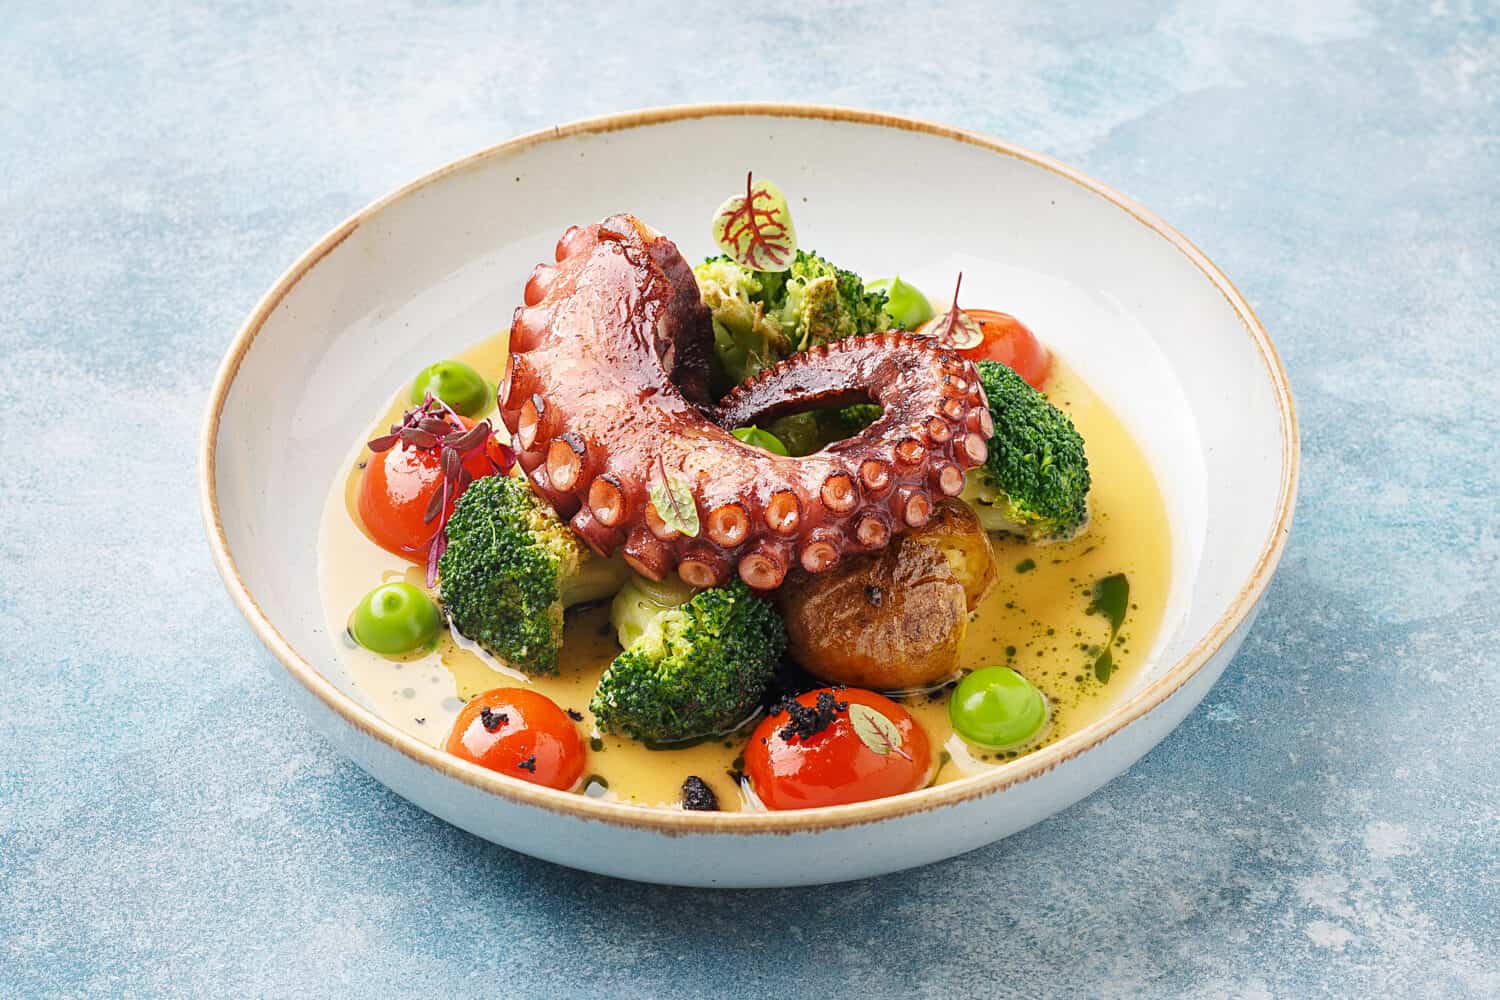 Grilled octopus tentacle with broccoli, cherry tomatoes and baked baby potatoes in white porcelain plate over blue concrete background. Side view, close up